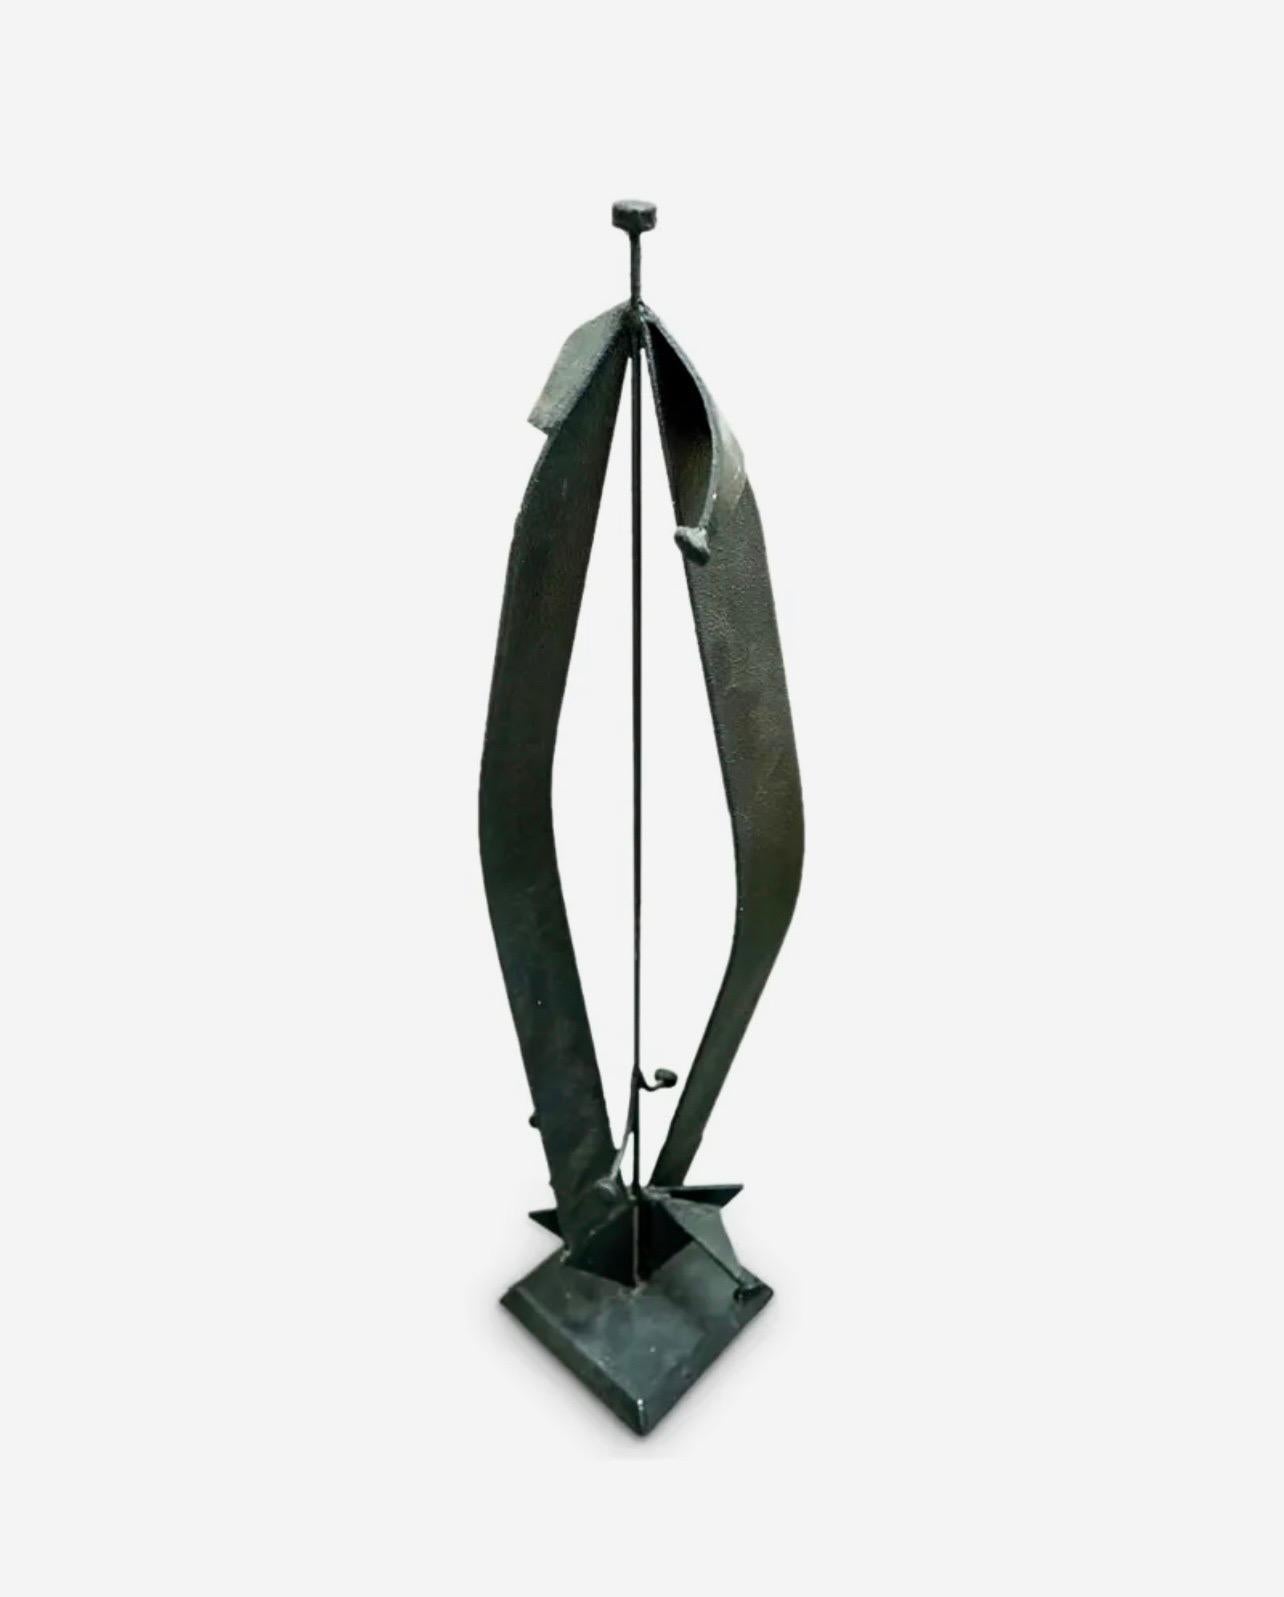 Large Mario Almaguer Cuban Art Welded Painted Steel Abstract Sculpture Modernism For Sale 2